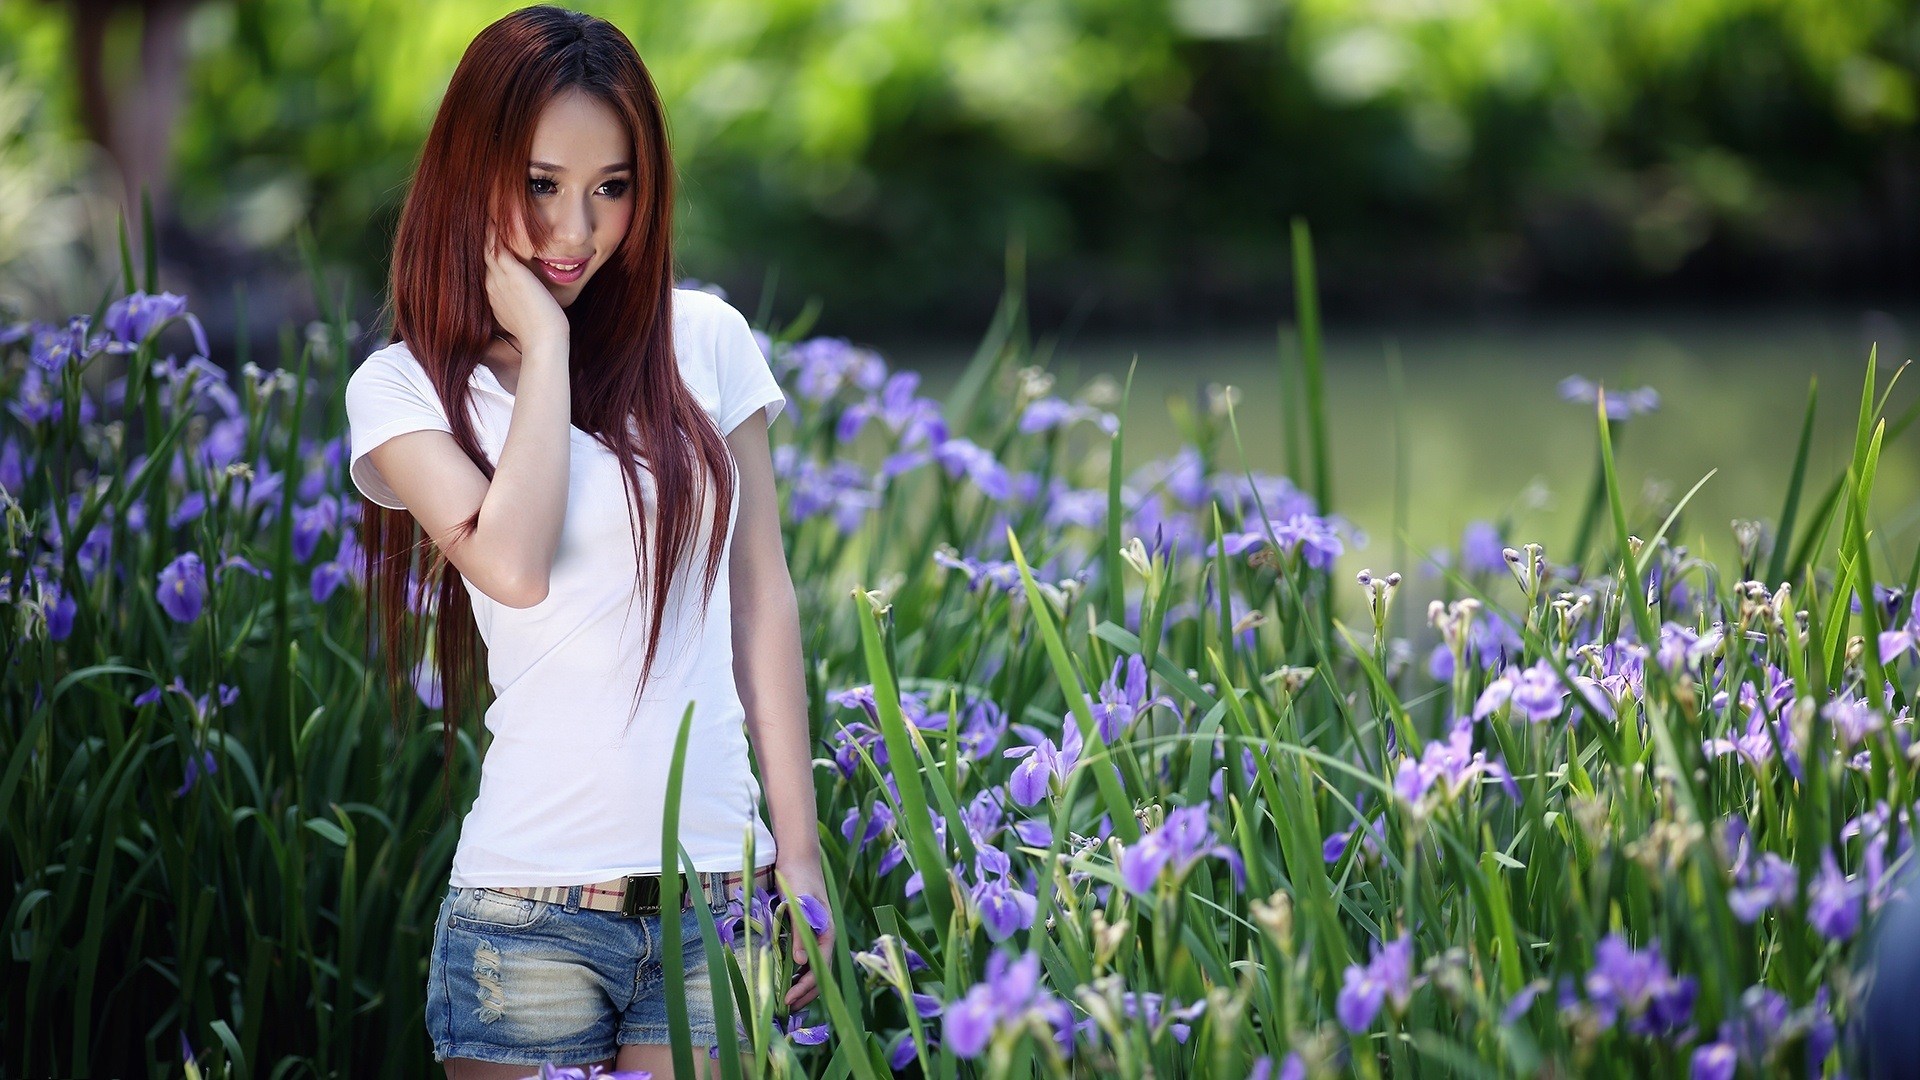 People 1920x1080 women Asian flowers jean shorts model redhead long hair women outdoors nature looking away torn jeans T-shirt smiling plants depth of field belt outdoors standing dyed hair